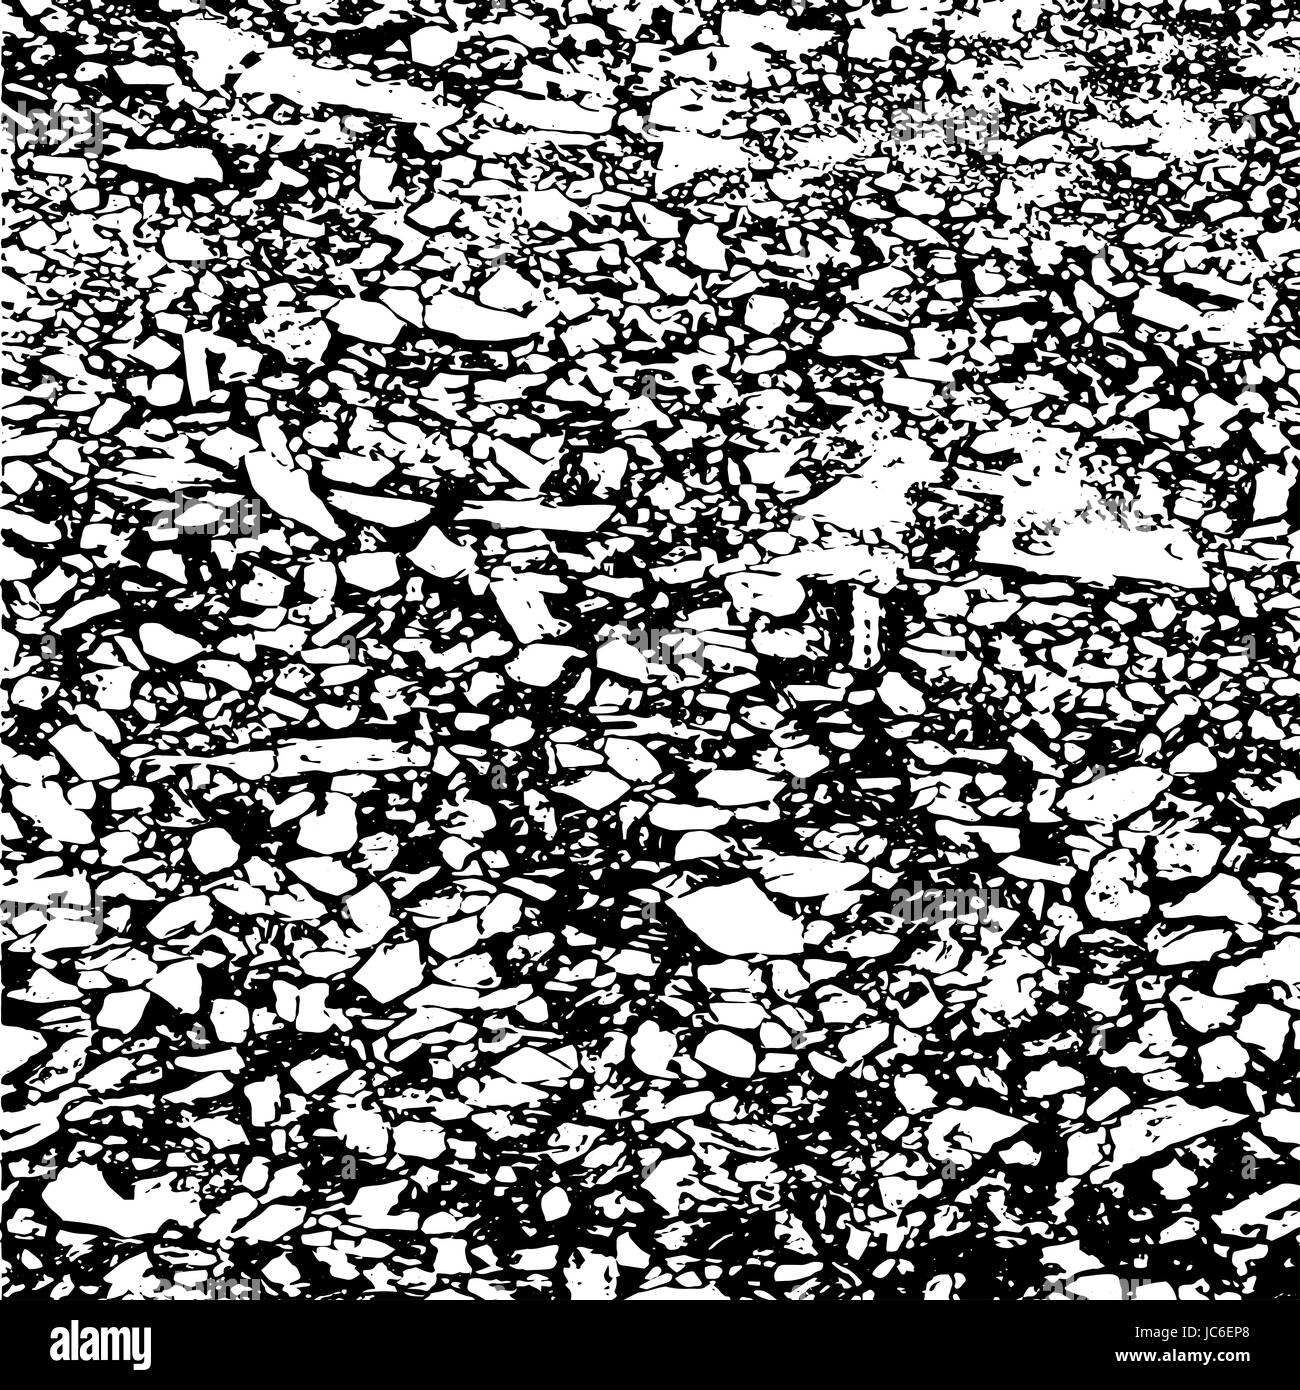 vector of grunge vintage background black and white Stock Photo